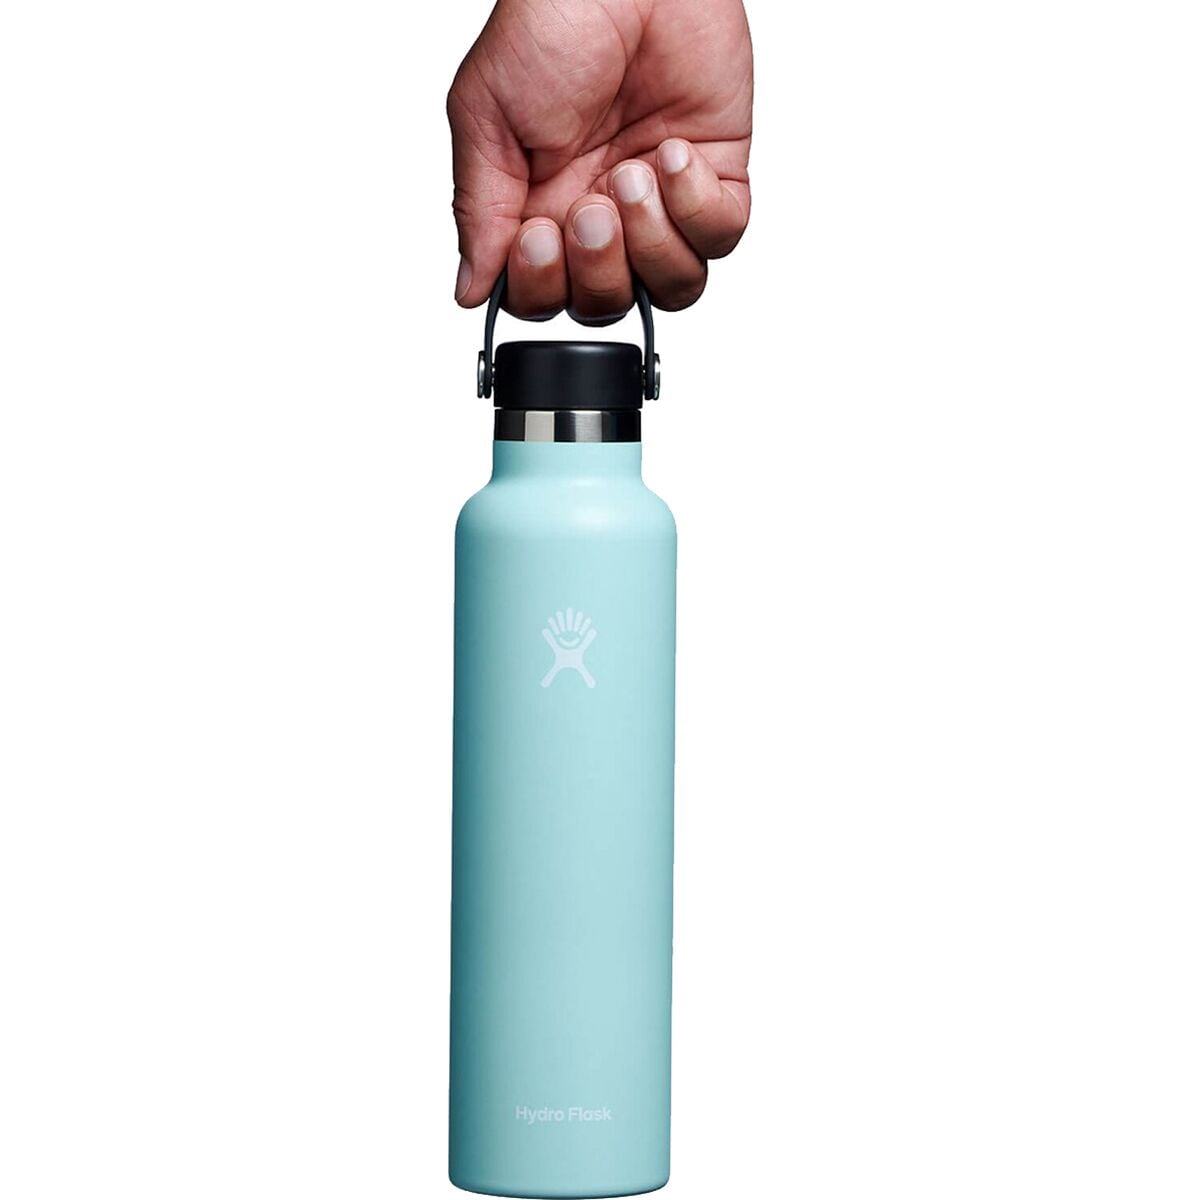 Hydro Flask 24 oz. Standard Mouth Bottle - Seagrass